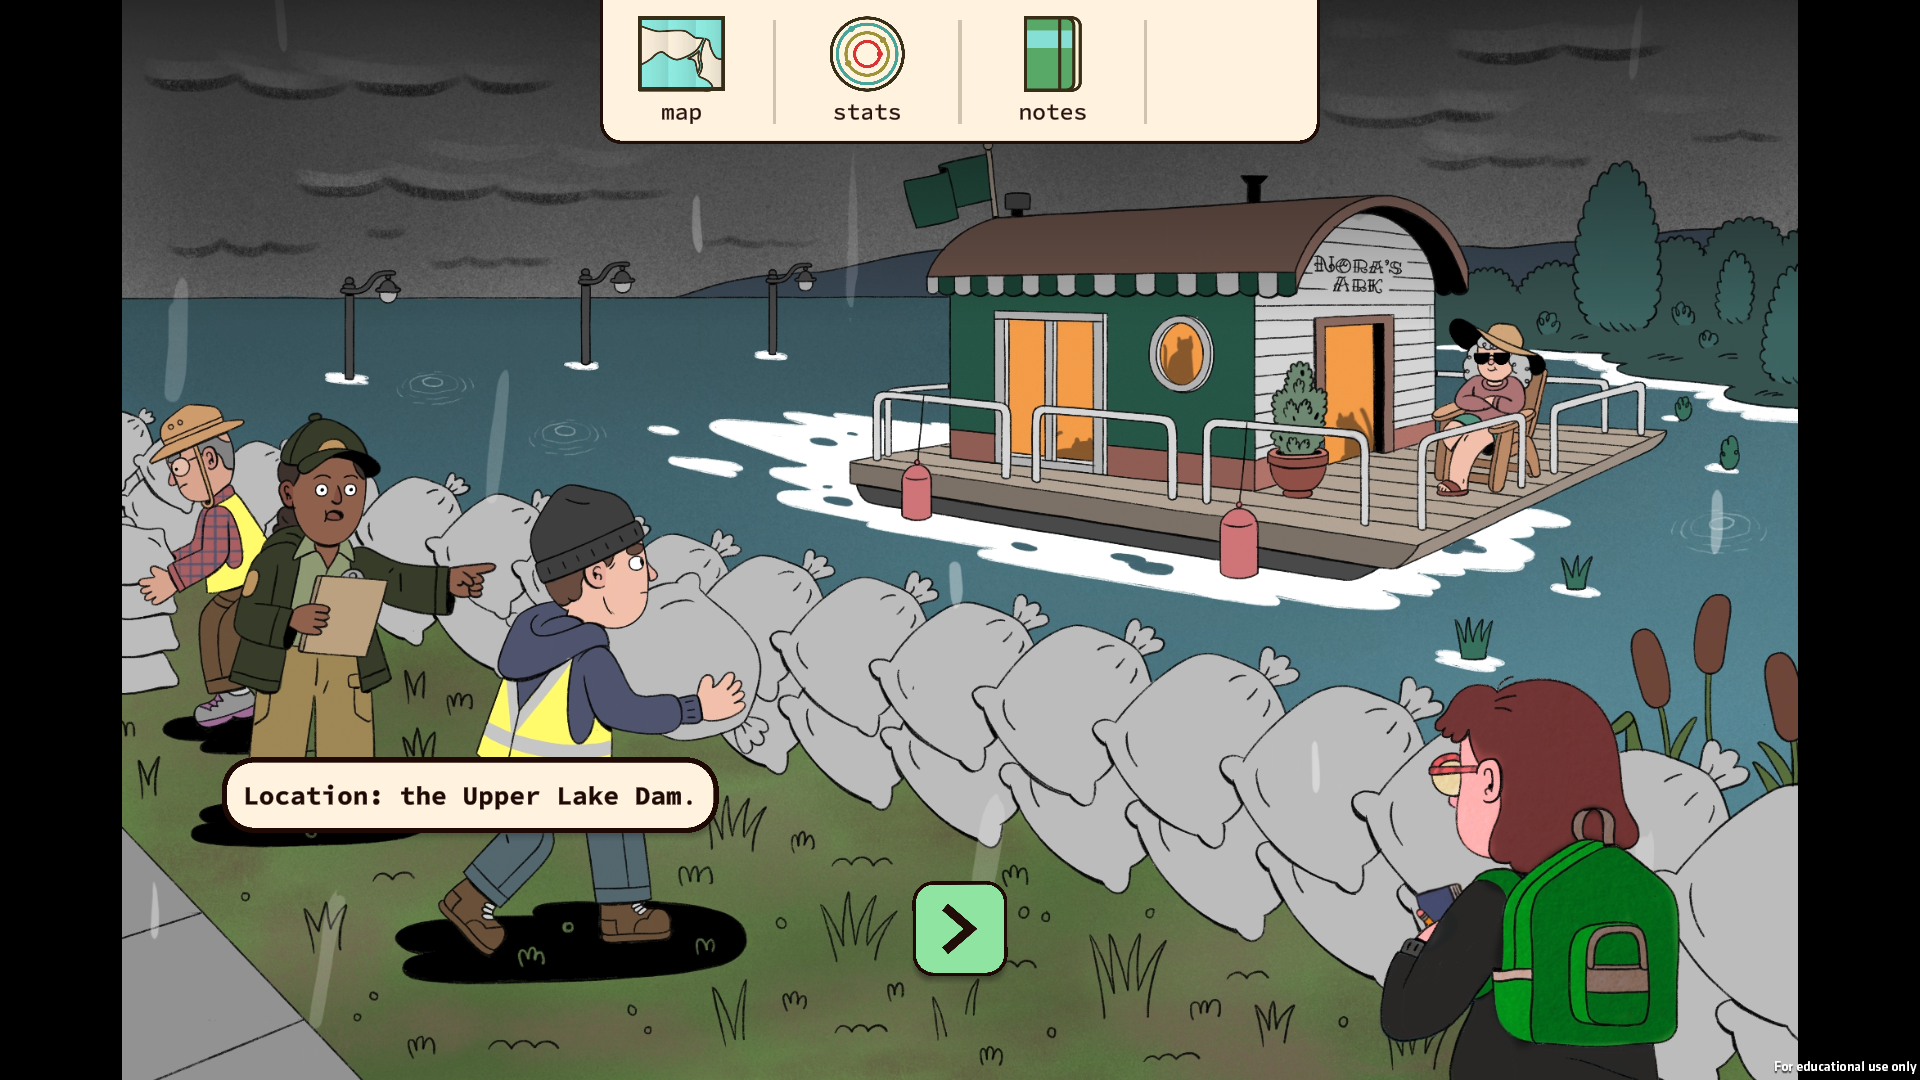 Screen shot of the game "Headlines and High Water" by Field Day Labs.